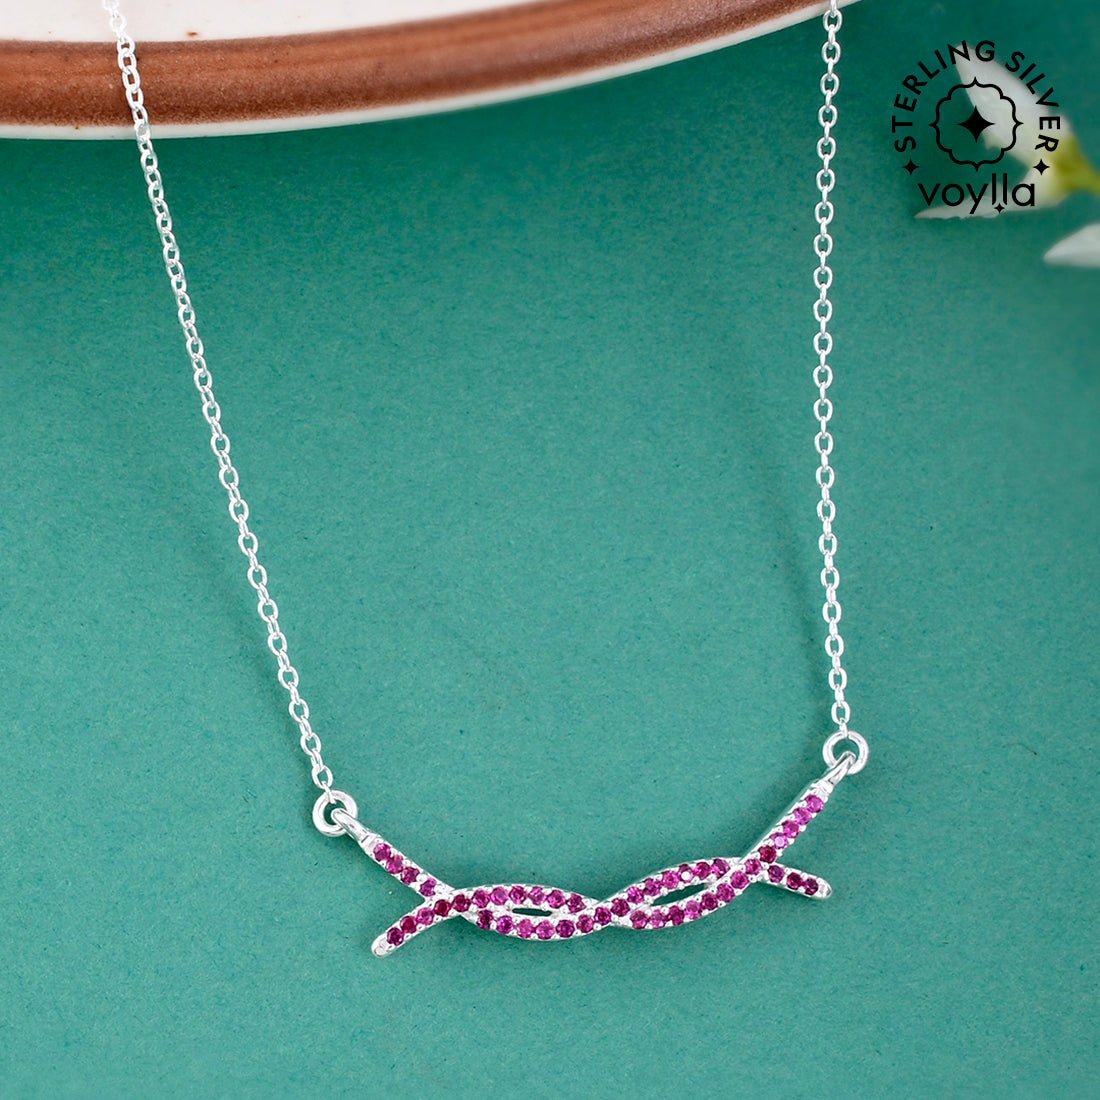 Stylish 925 Sterling Silver necklace with Pink Stones